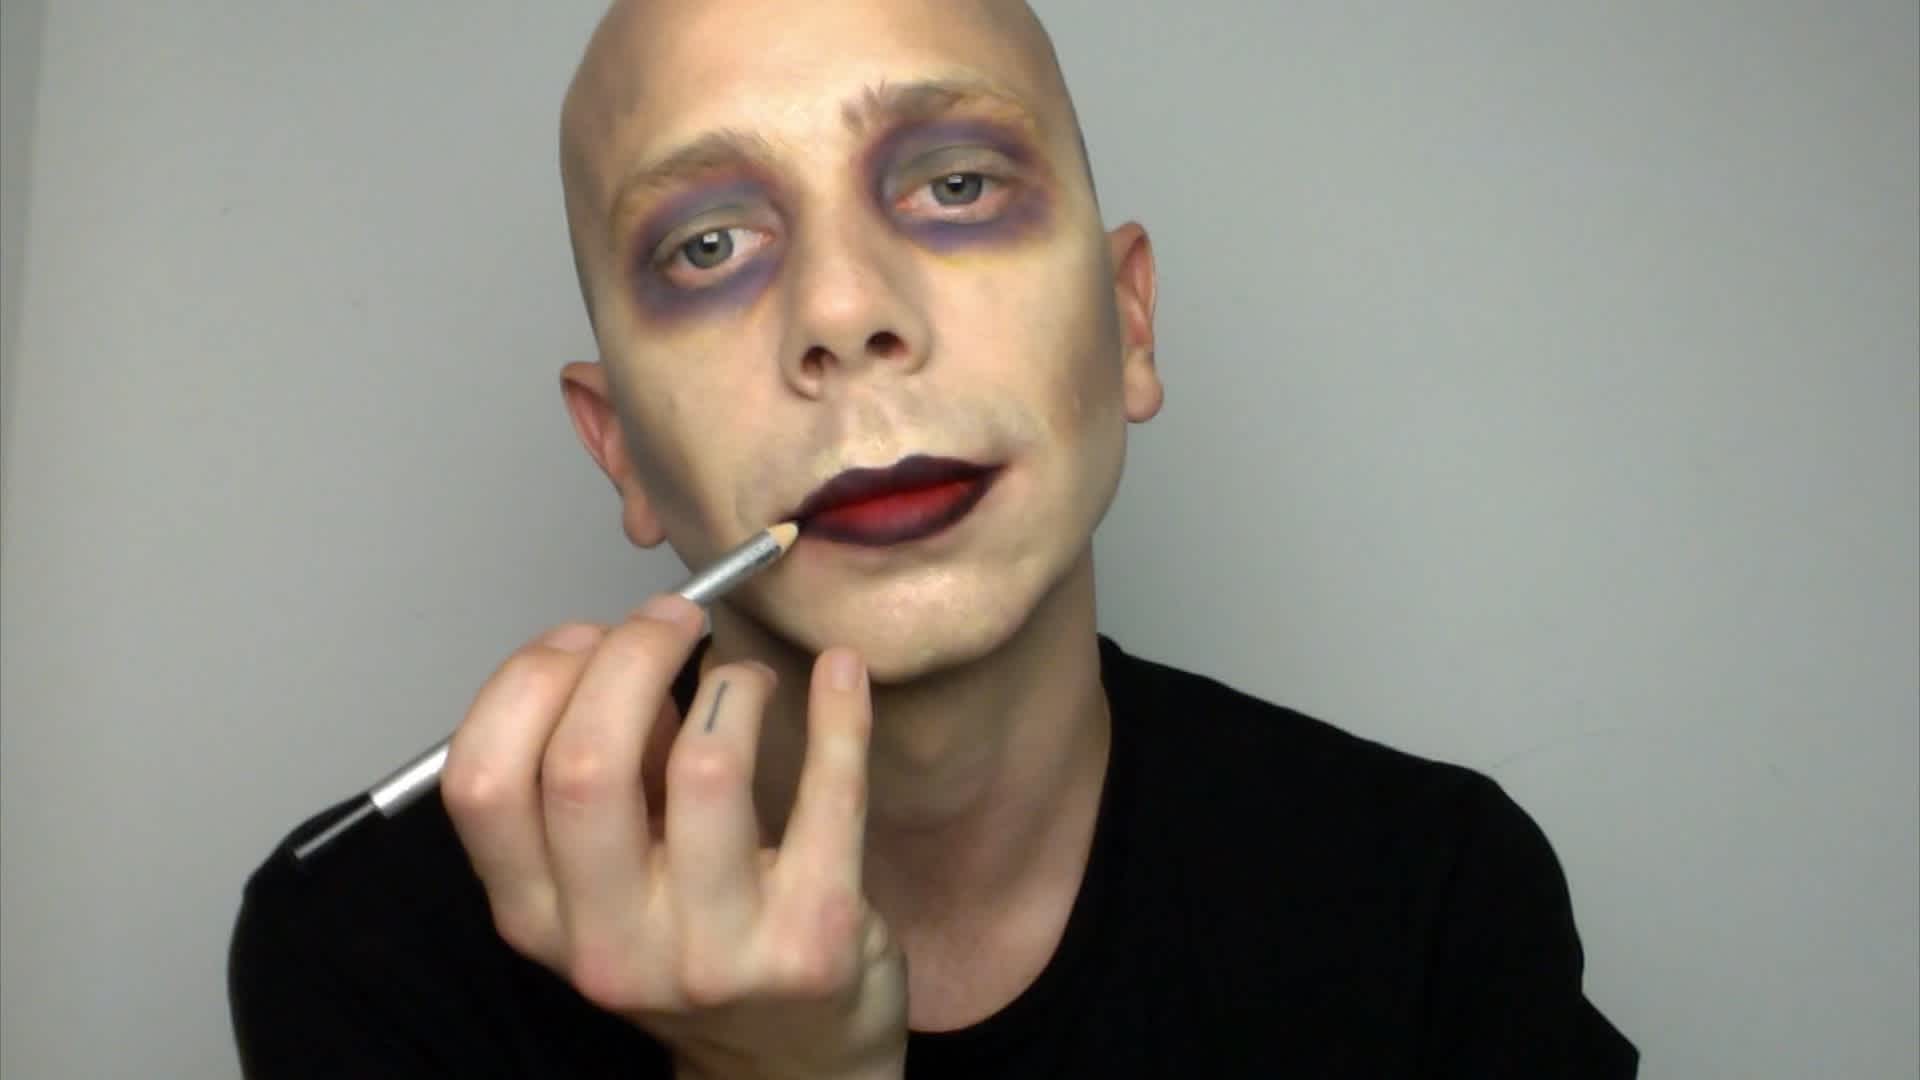 Makeup Tutorial: How to Look Great Without Having to High-Five Straight Men